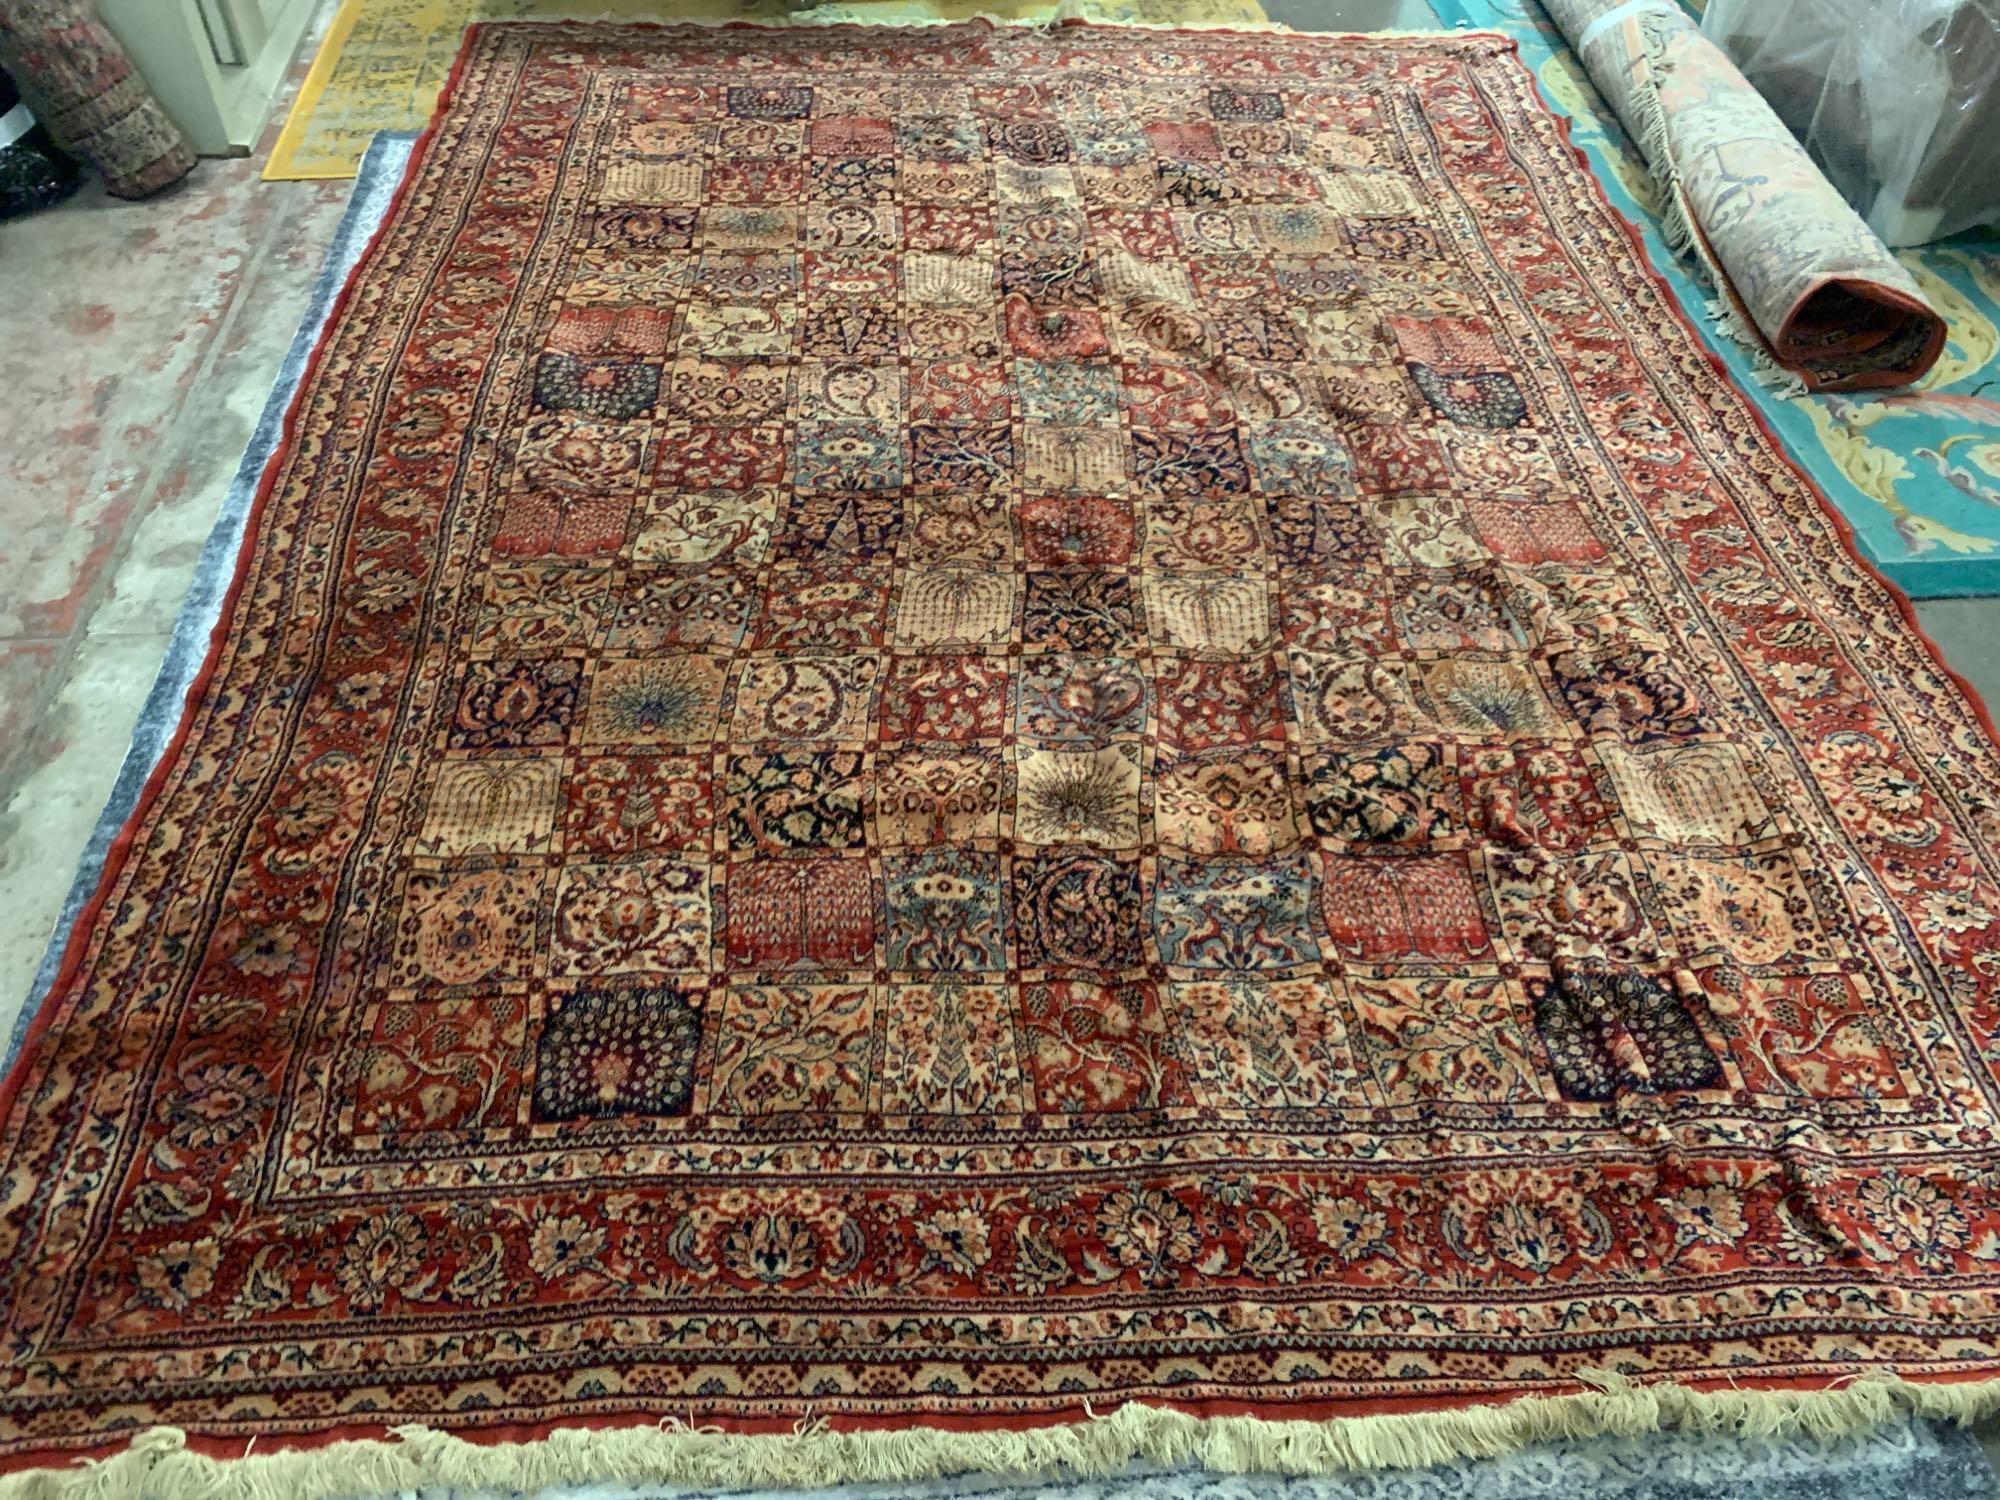 Jaipur Carpet, Rajhastan, North India, Wool on Cotton Foundation. The polychrome field with a ' - Image 9 of 9